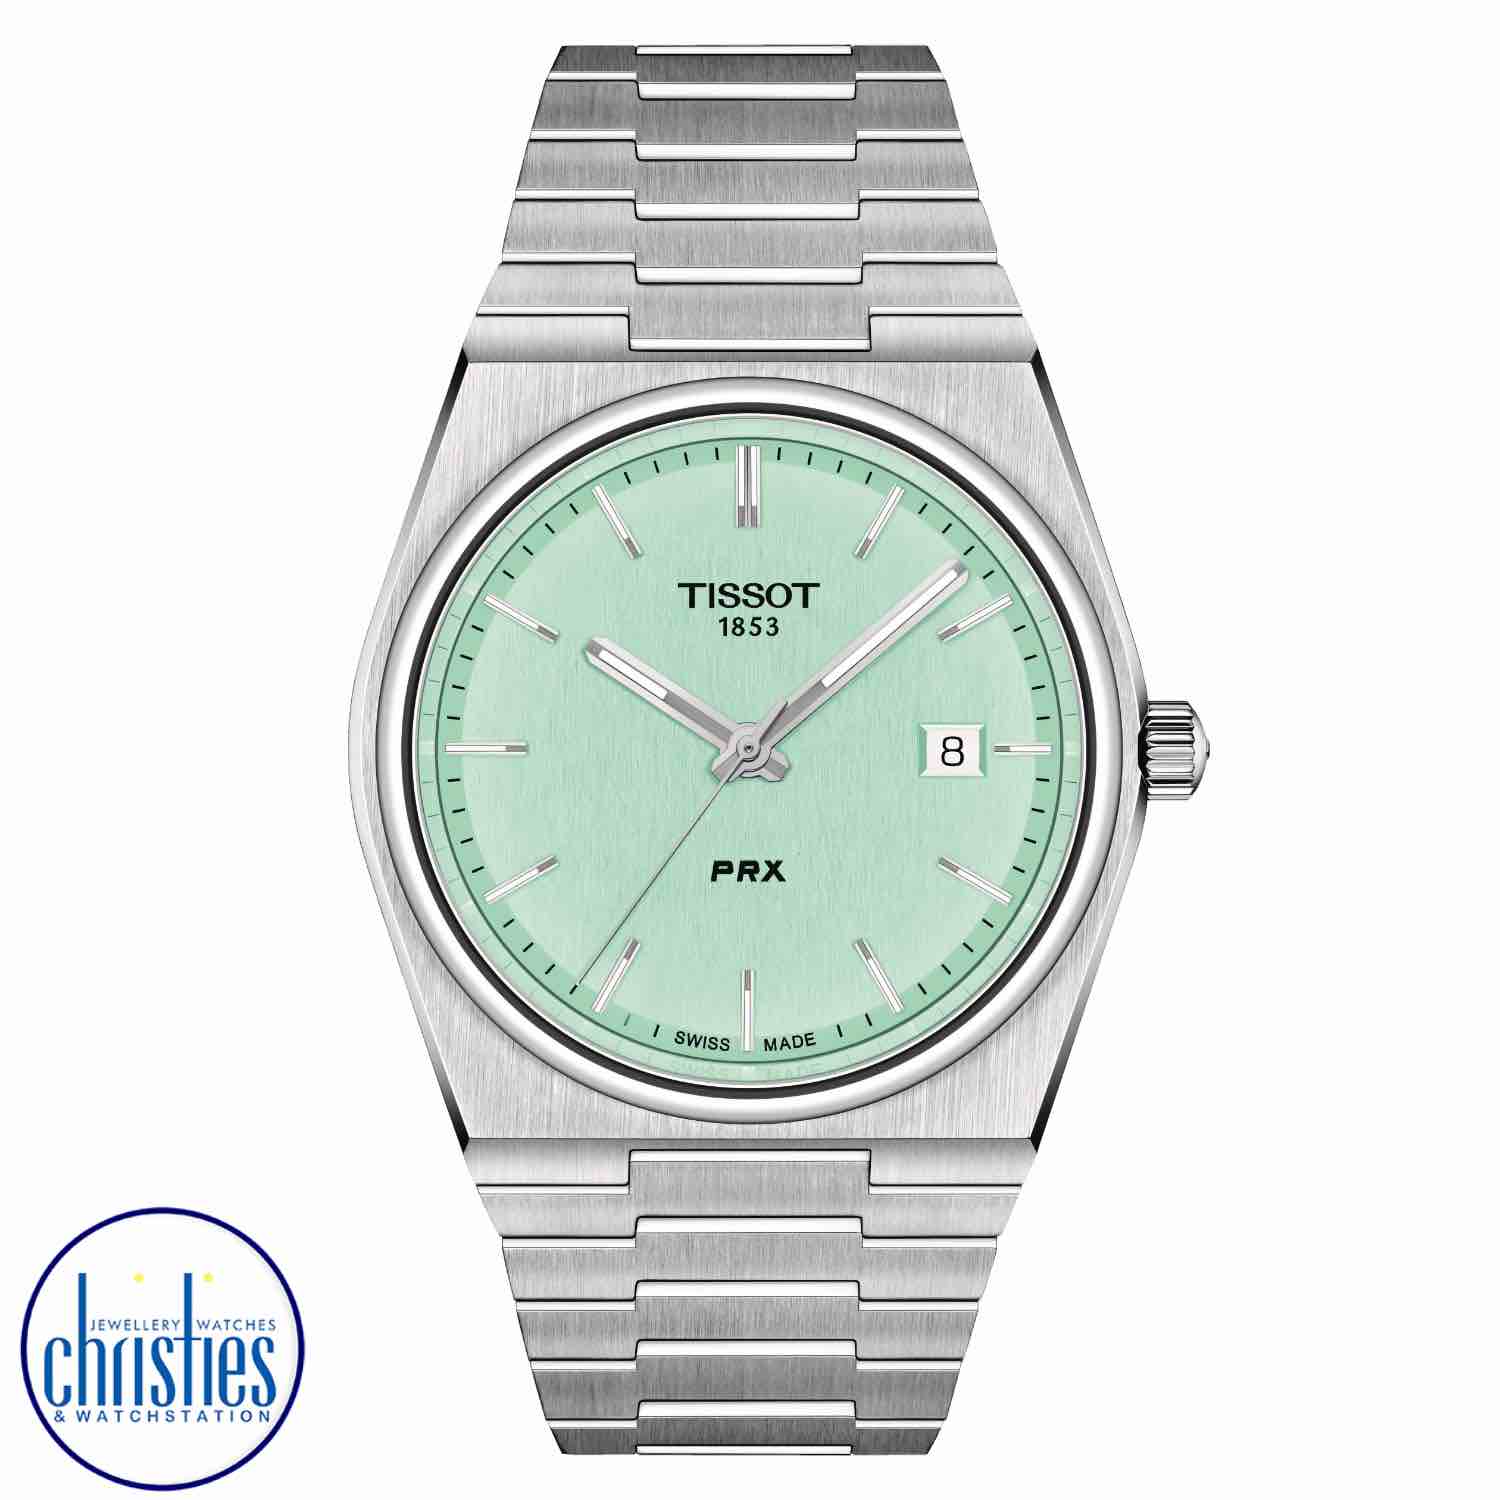 TISSOT PRX T-Classic T1374101109101. A sapphire crystal gives a watch the following properties: extremely high resistance to impact and superior screen and hand readability thanks to its transparency. tissot nz auckland